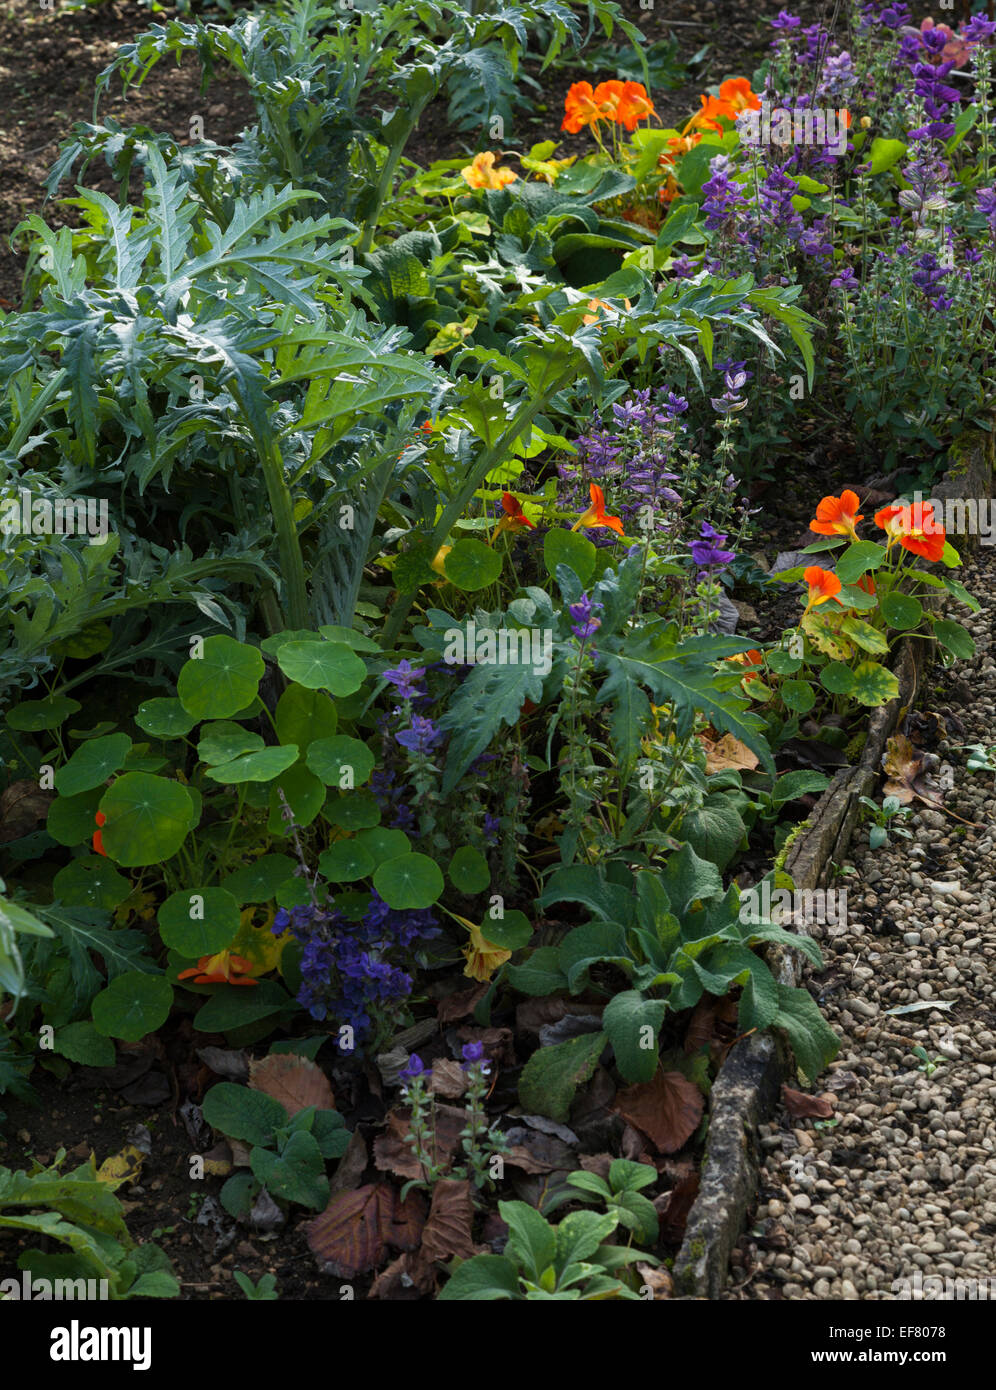 French marigolds and other flowers growing amongst artichoke plants in the vegetable garden, Rousham House, Oxfordshire, England Stock Photo